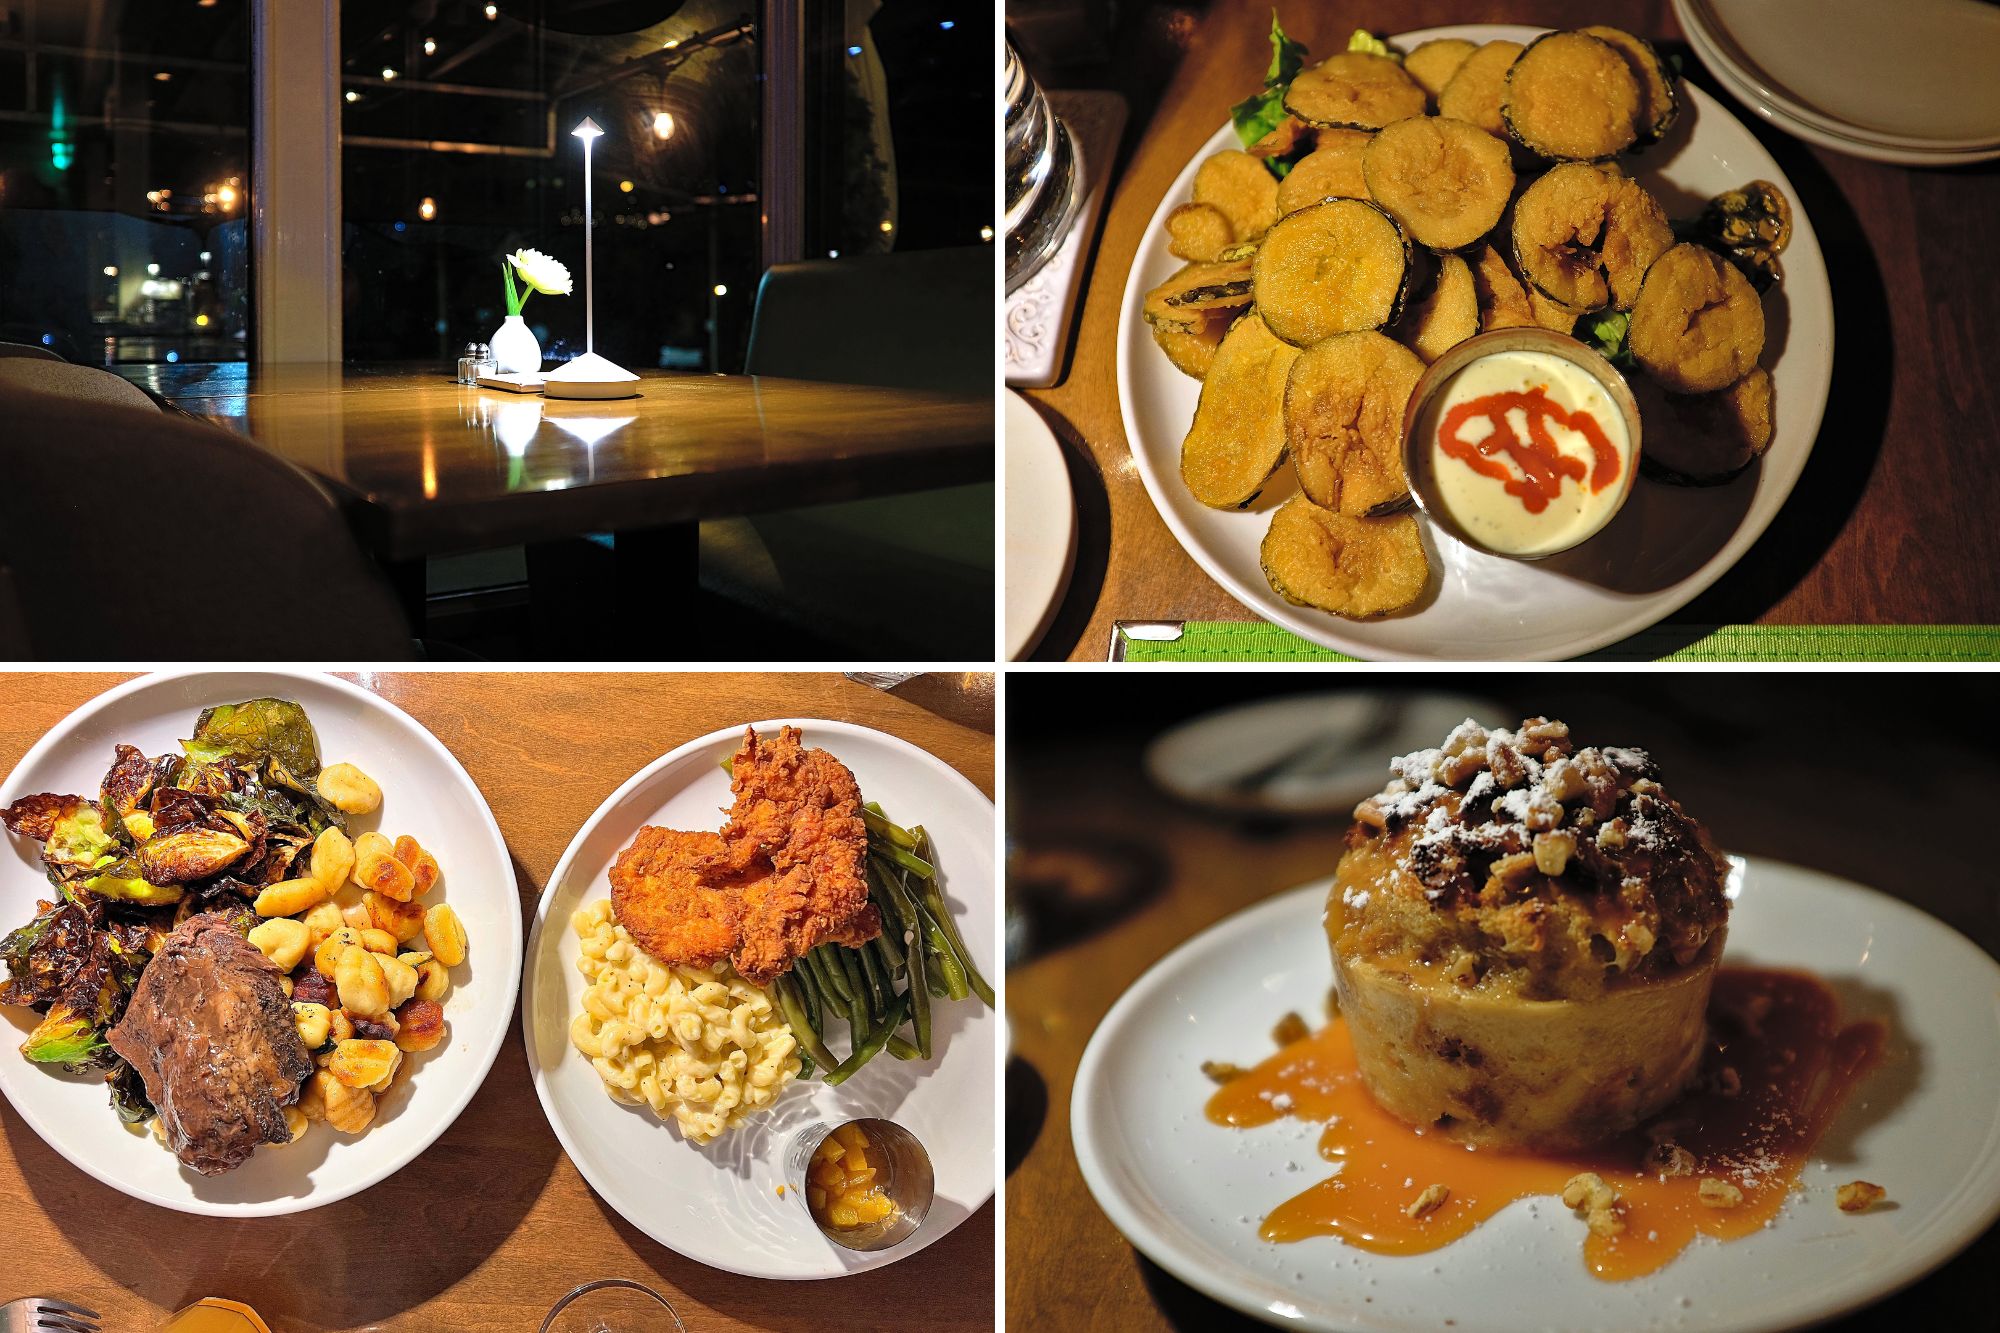 A collage of the dining experience at Mozelle's